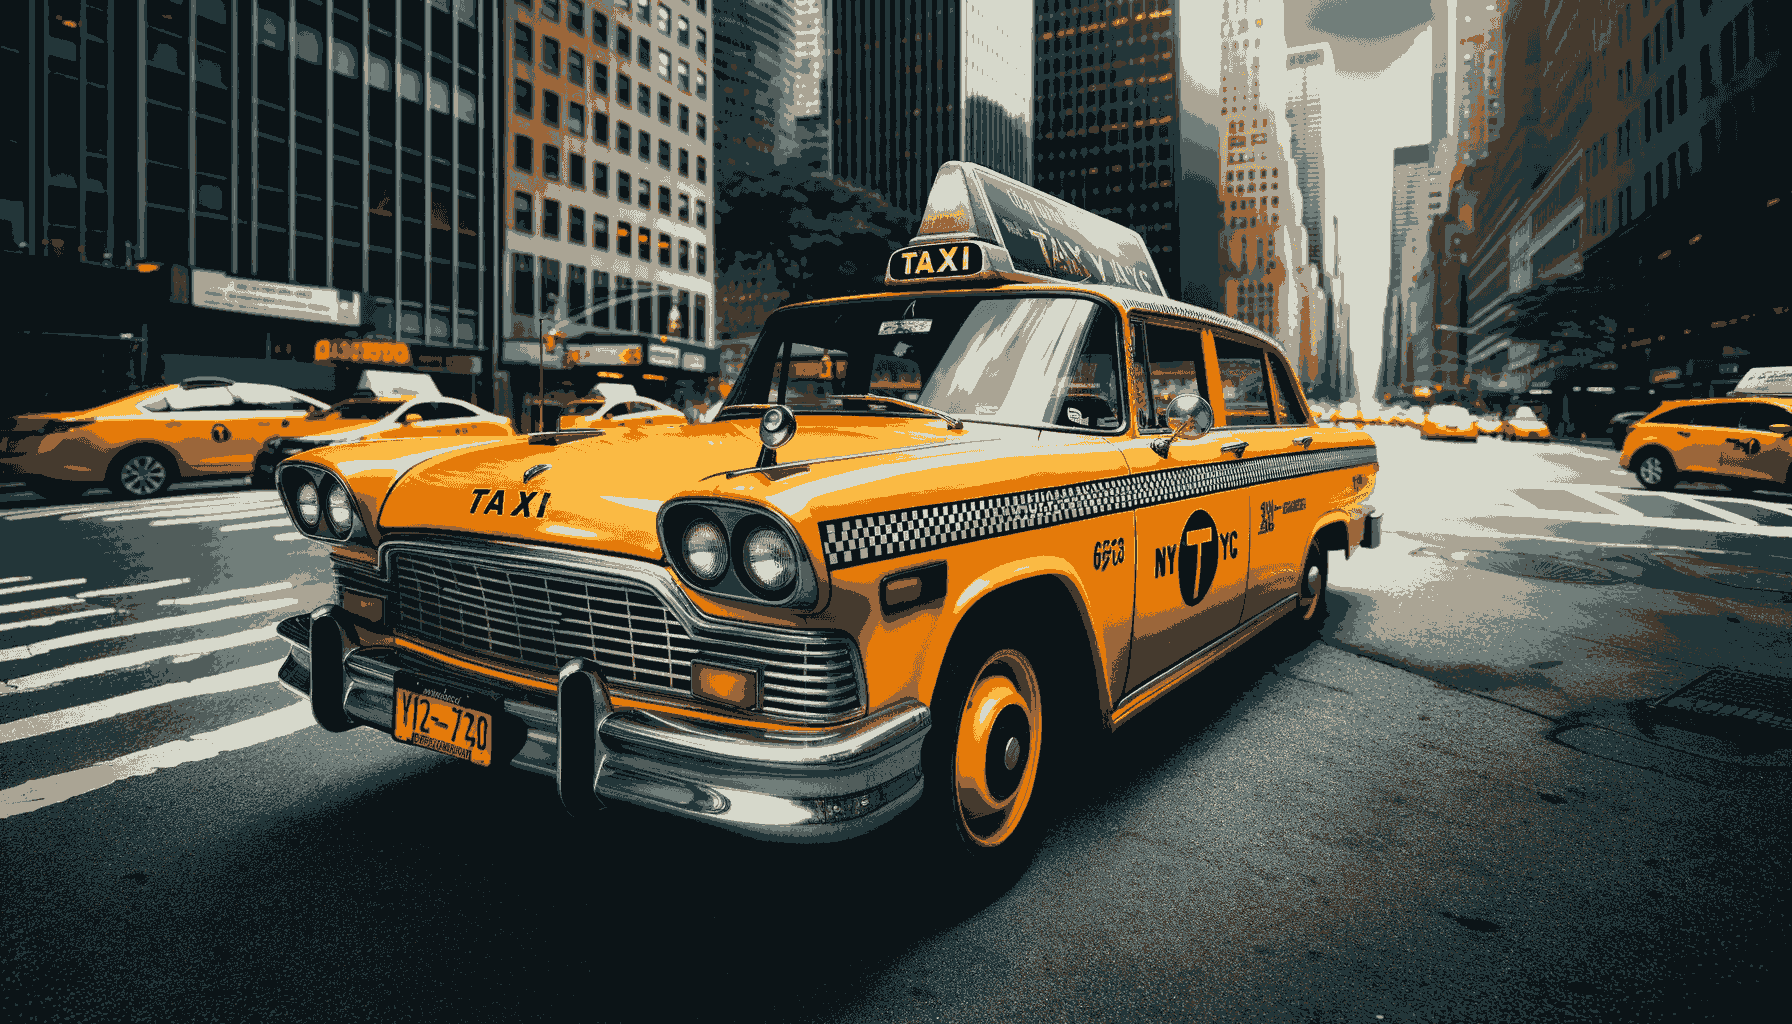 New York City taxi cab in bright yellow with black trim and details captured in a wide horizontal format. The taxi is shown on a bustling c